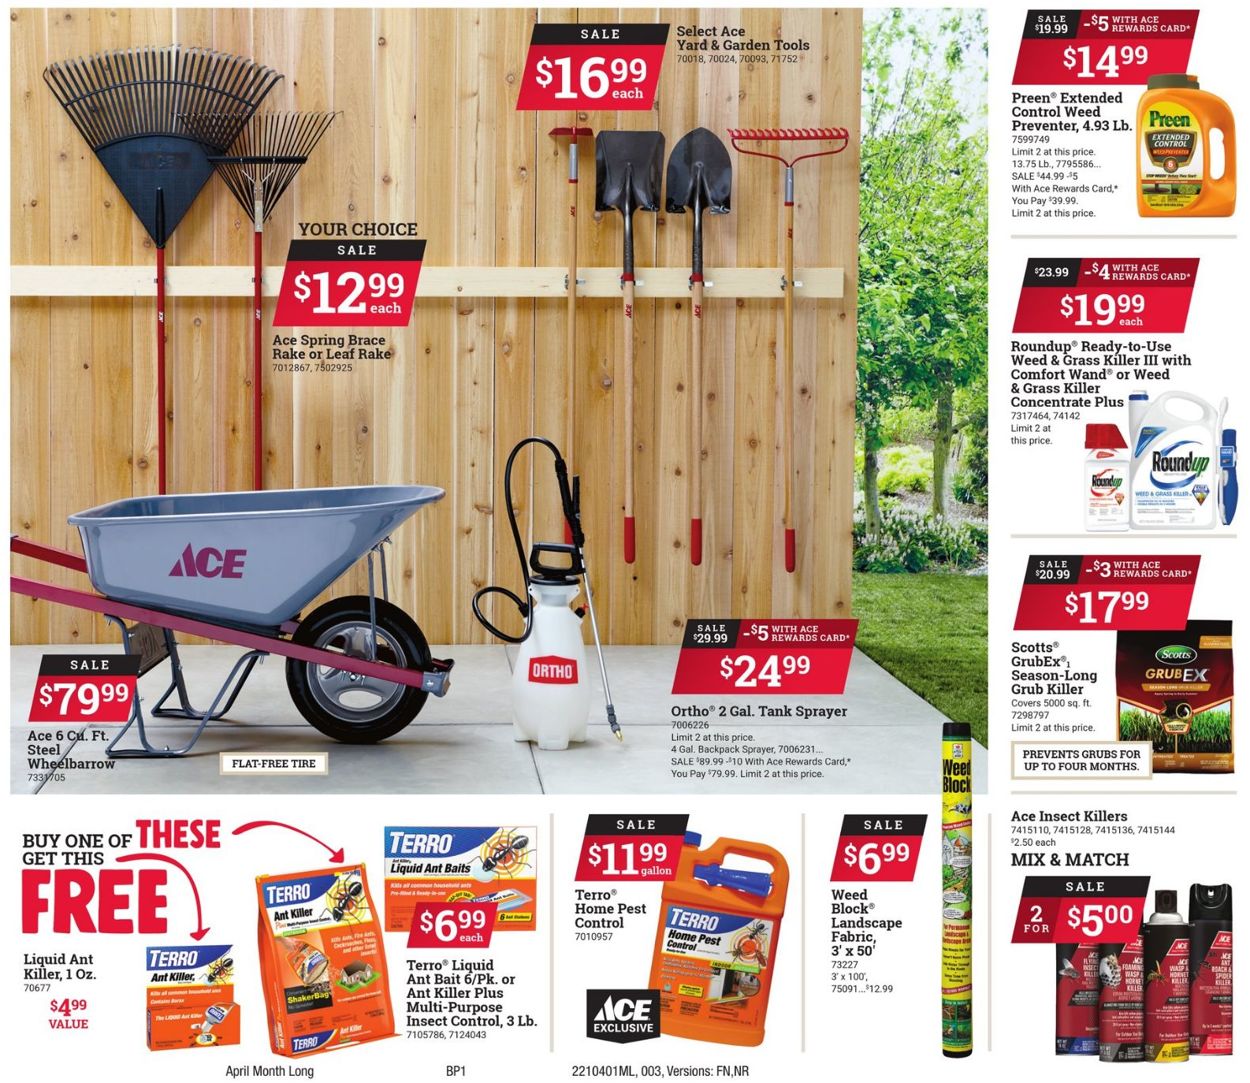 Ace Hardware Current weekly ad 04/01 04/30/2021 [3]